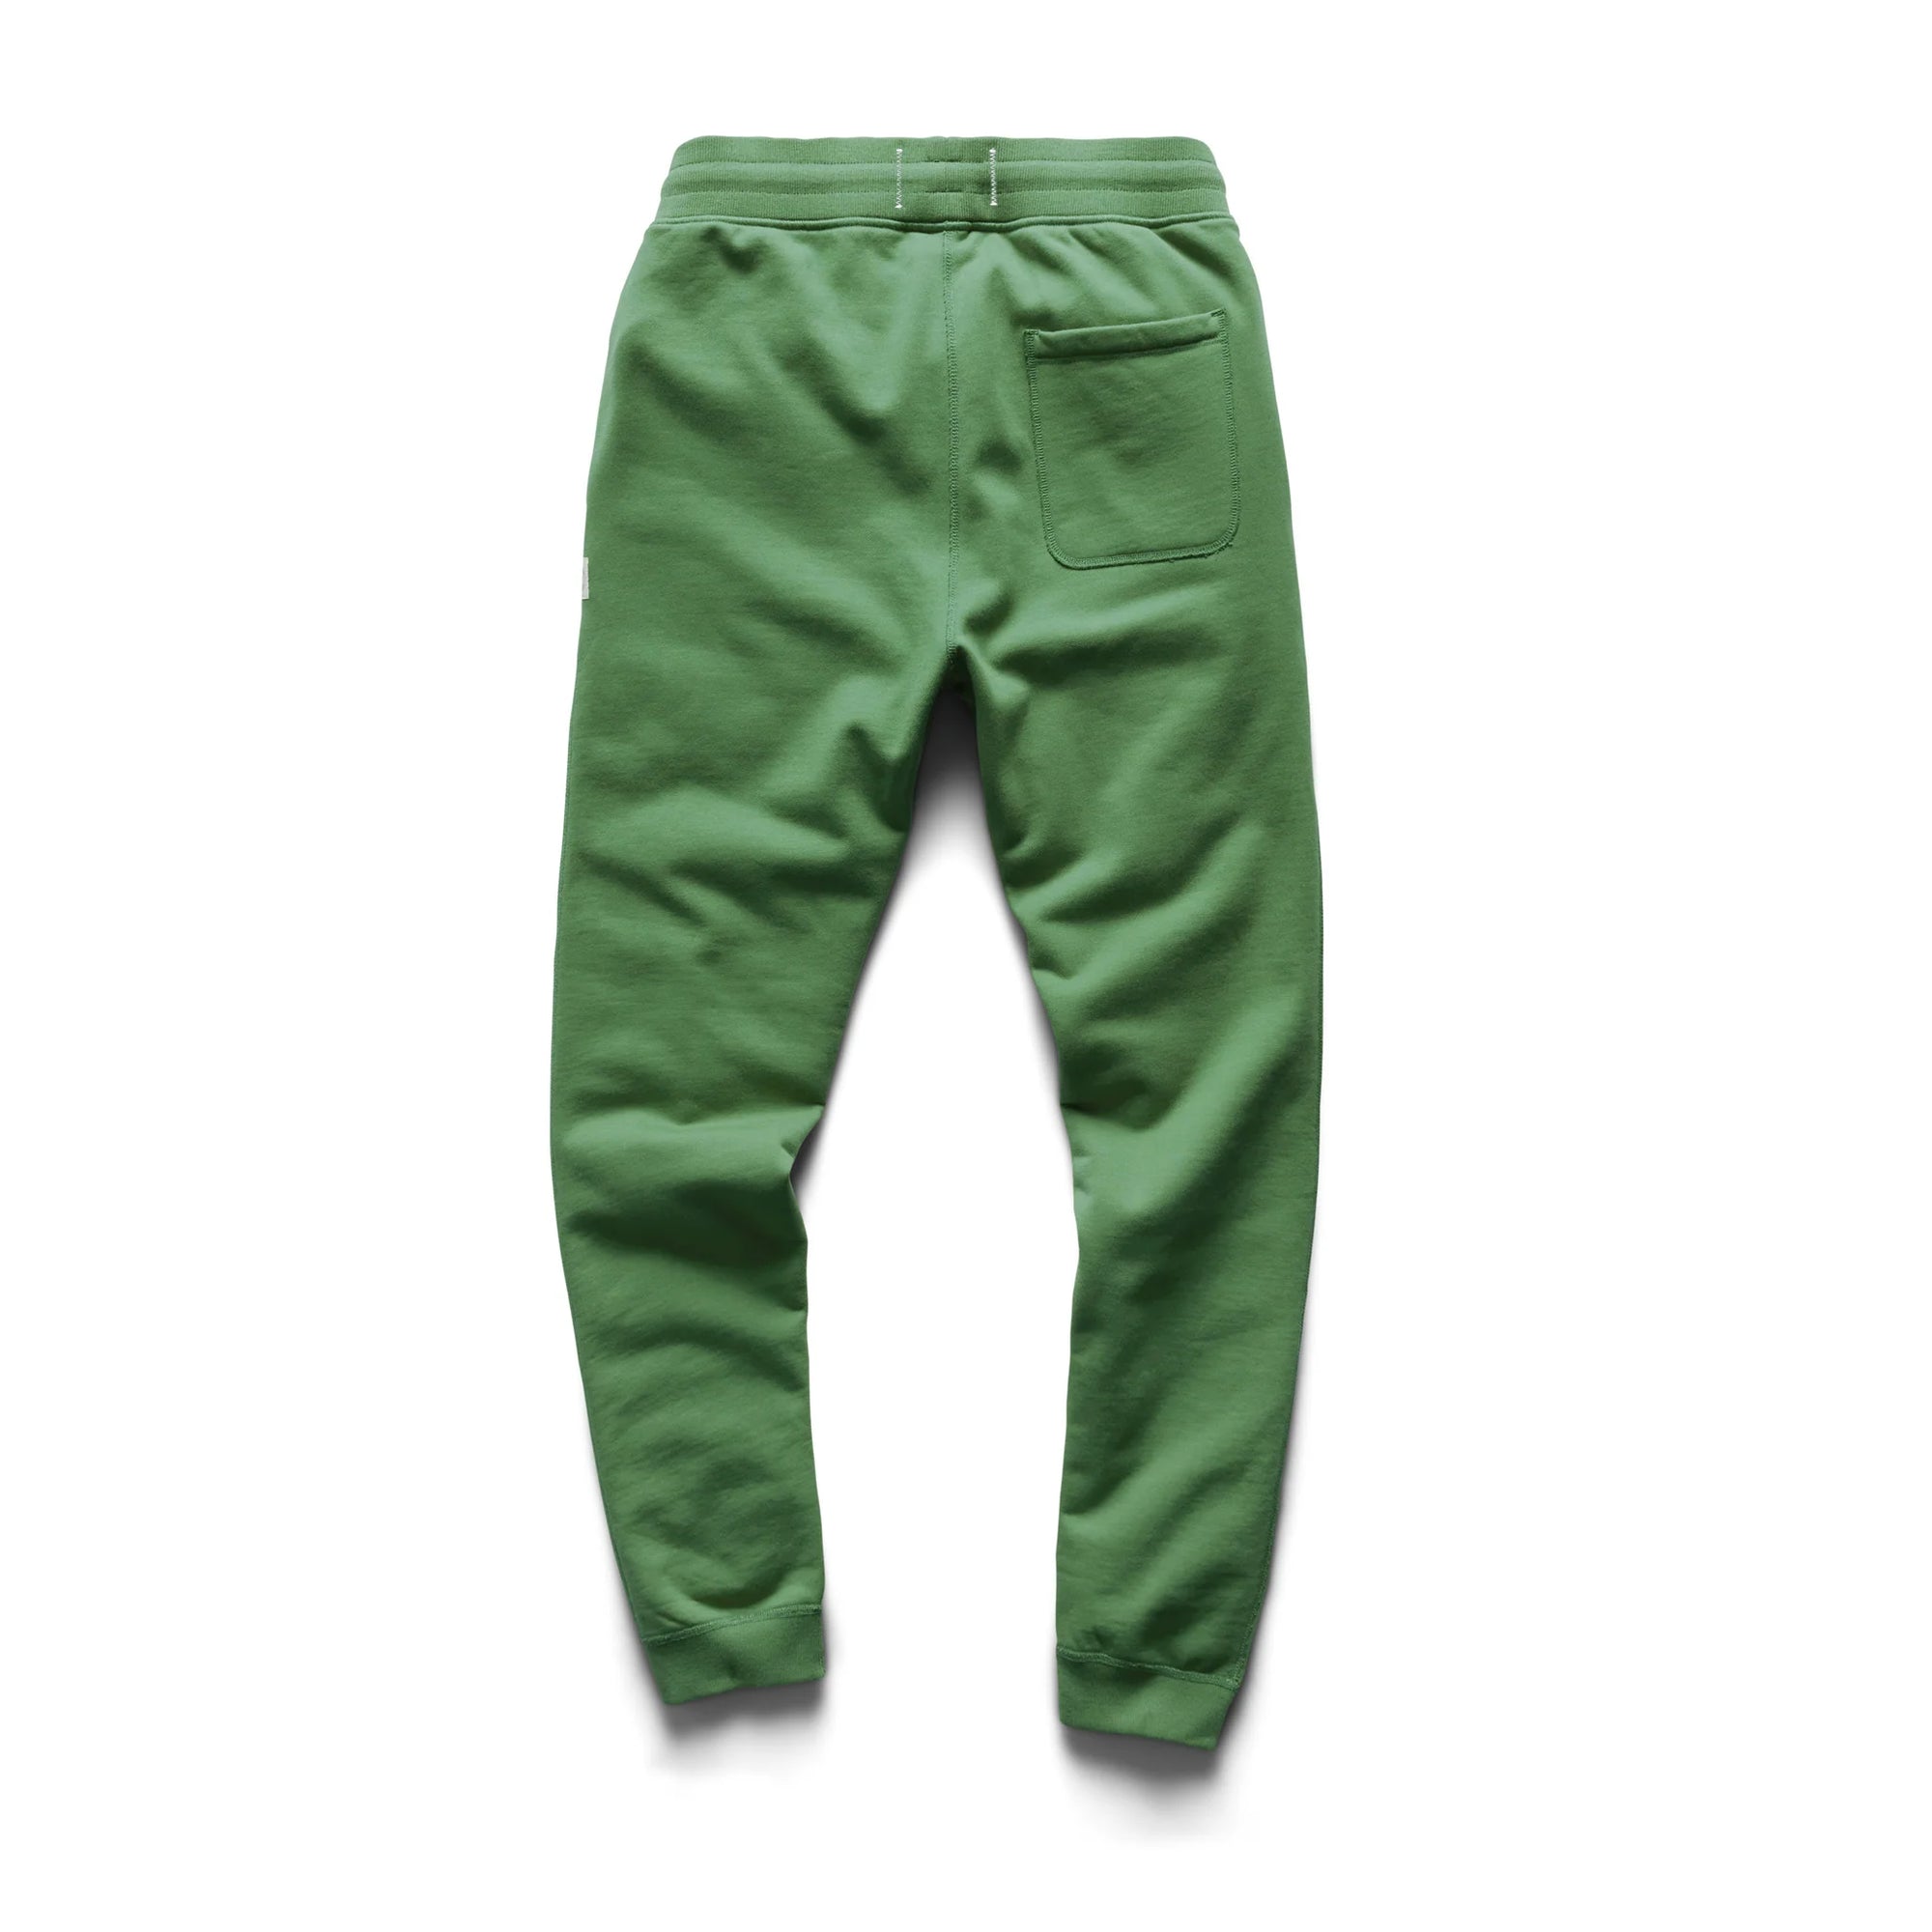 Reigning Champ Lightweight Terry Slim Sweatpant in Lawn Green